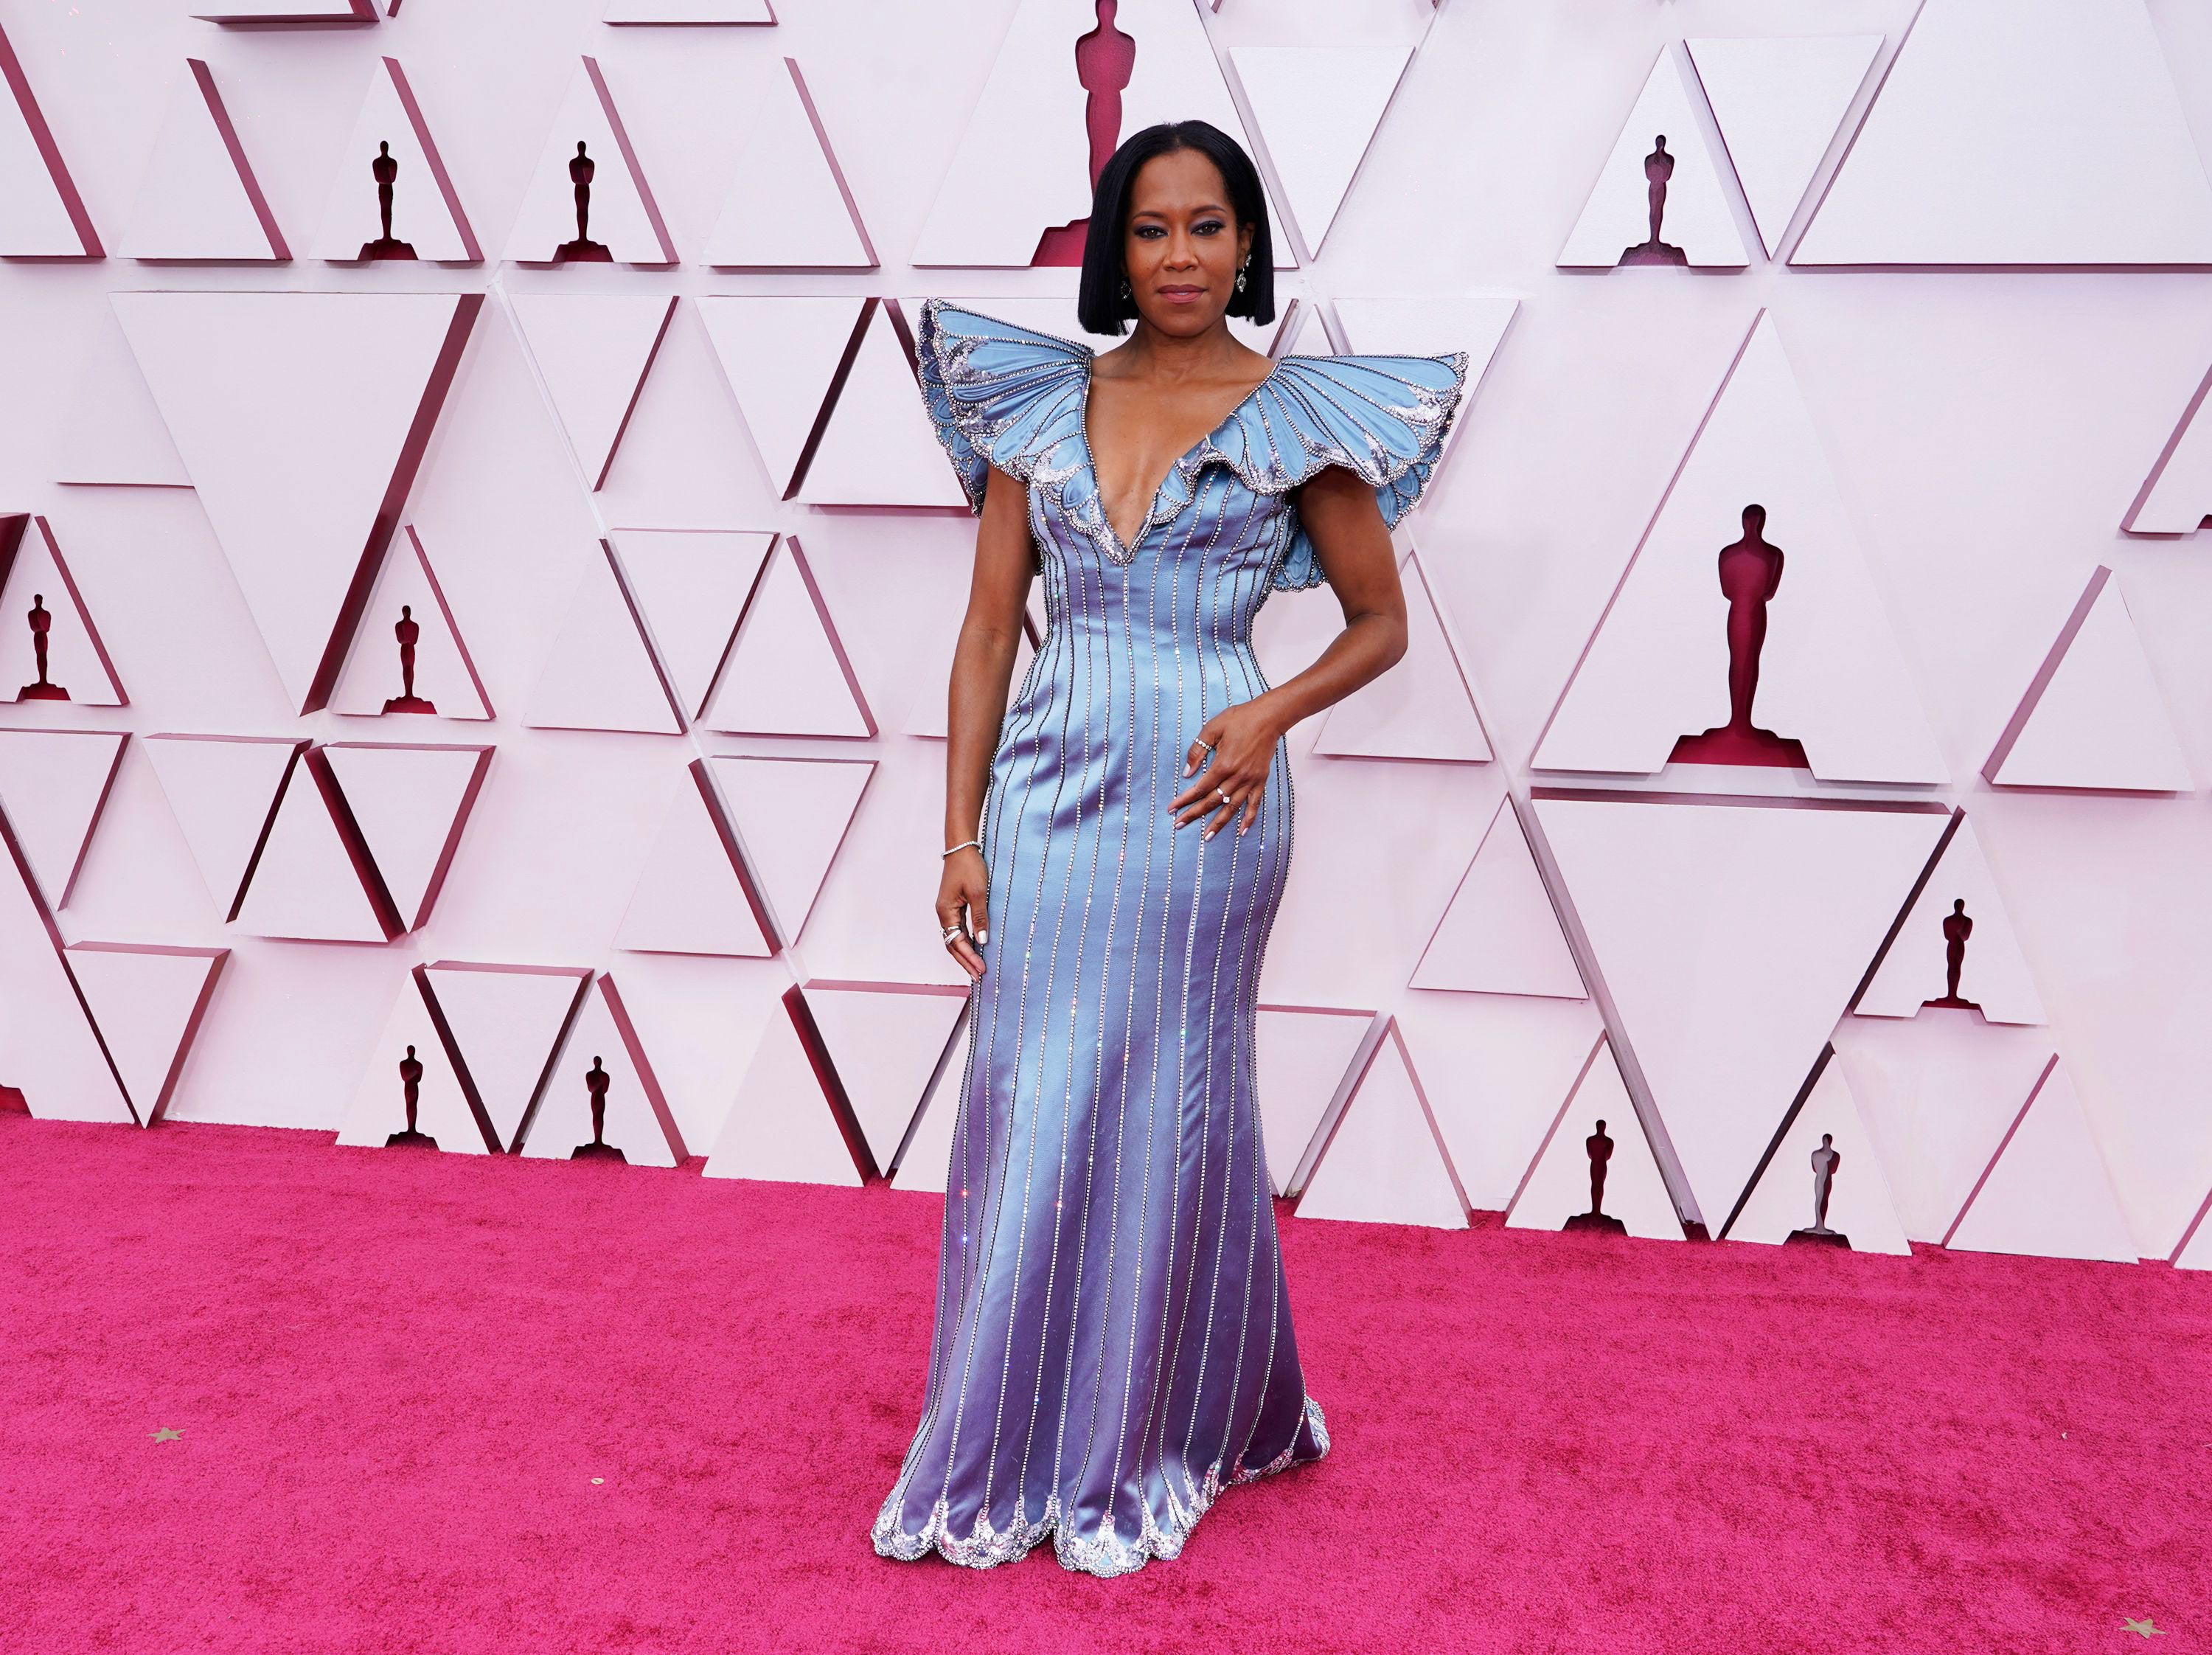 Oscars 2021: THE NOMINEES ARE IN! - On The Red Carpet